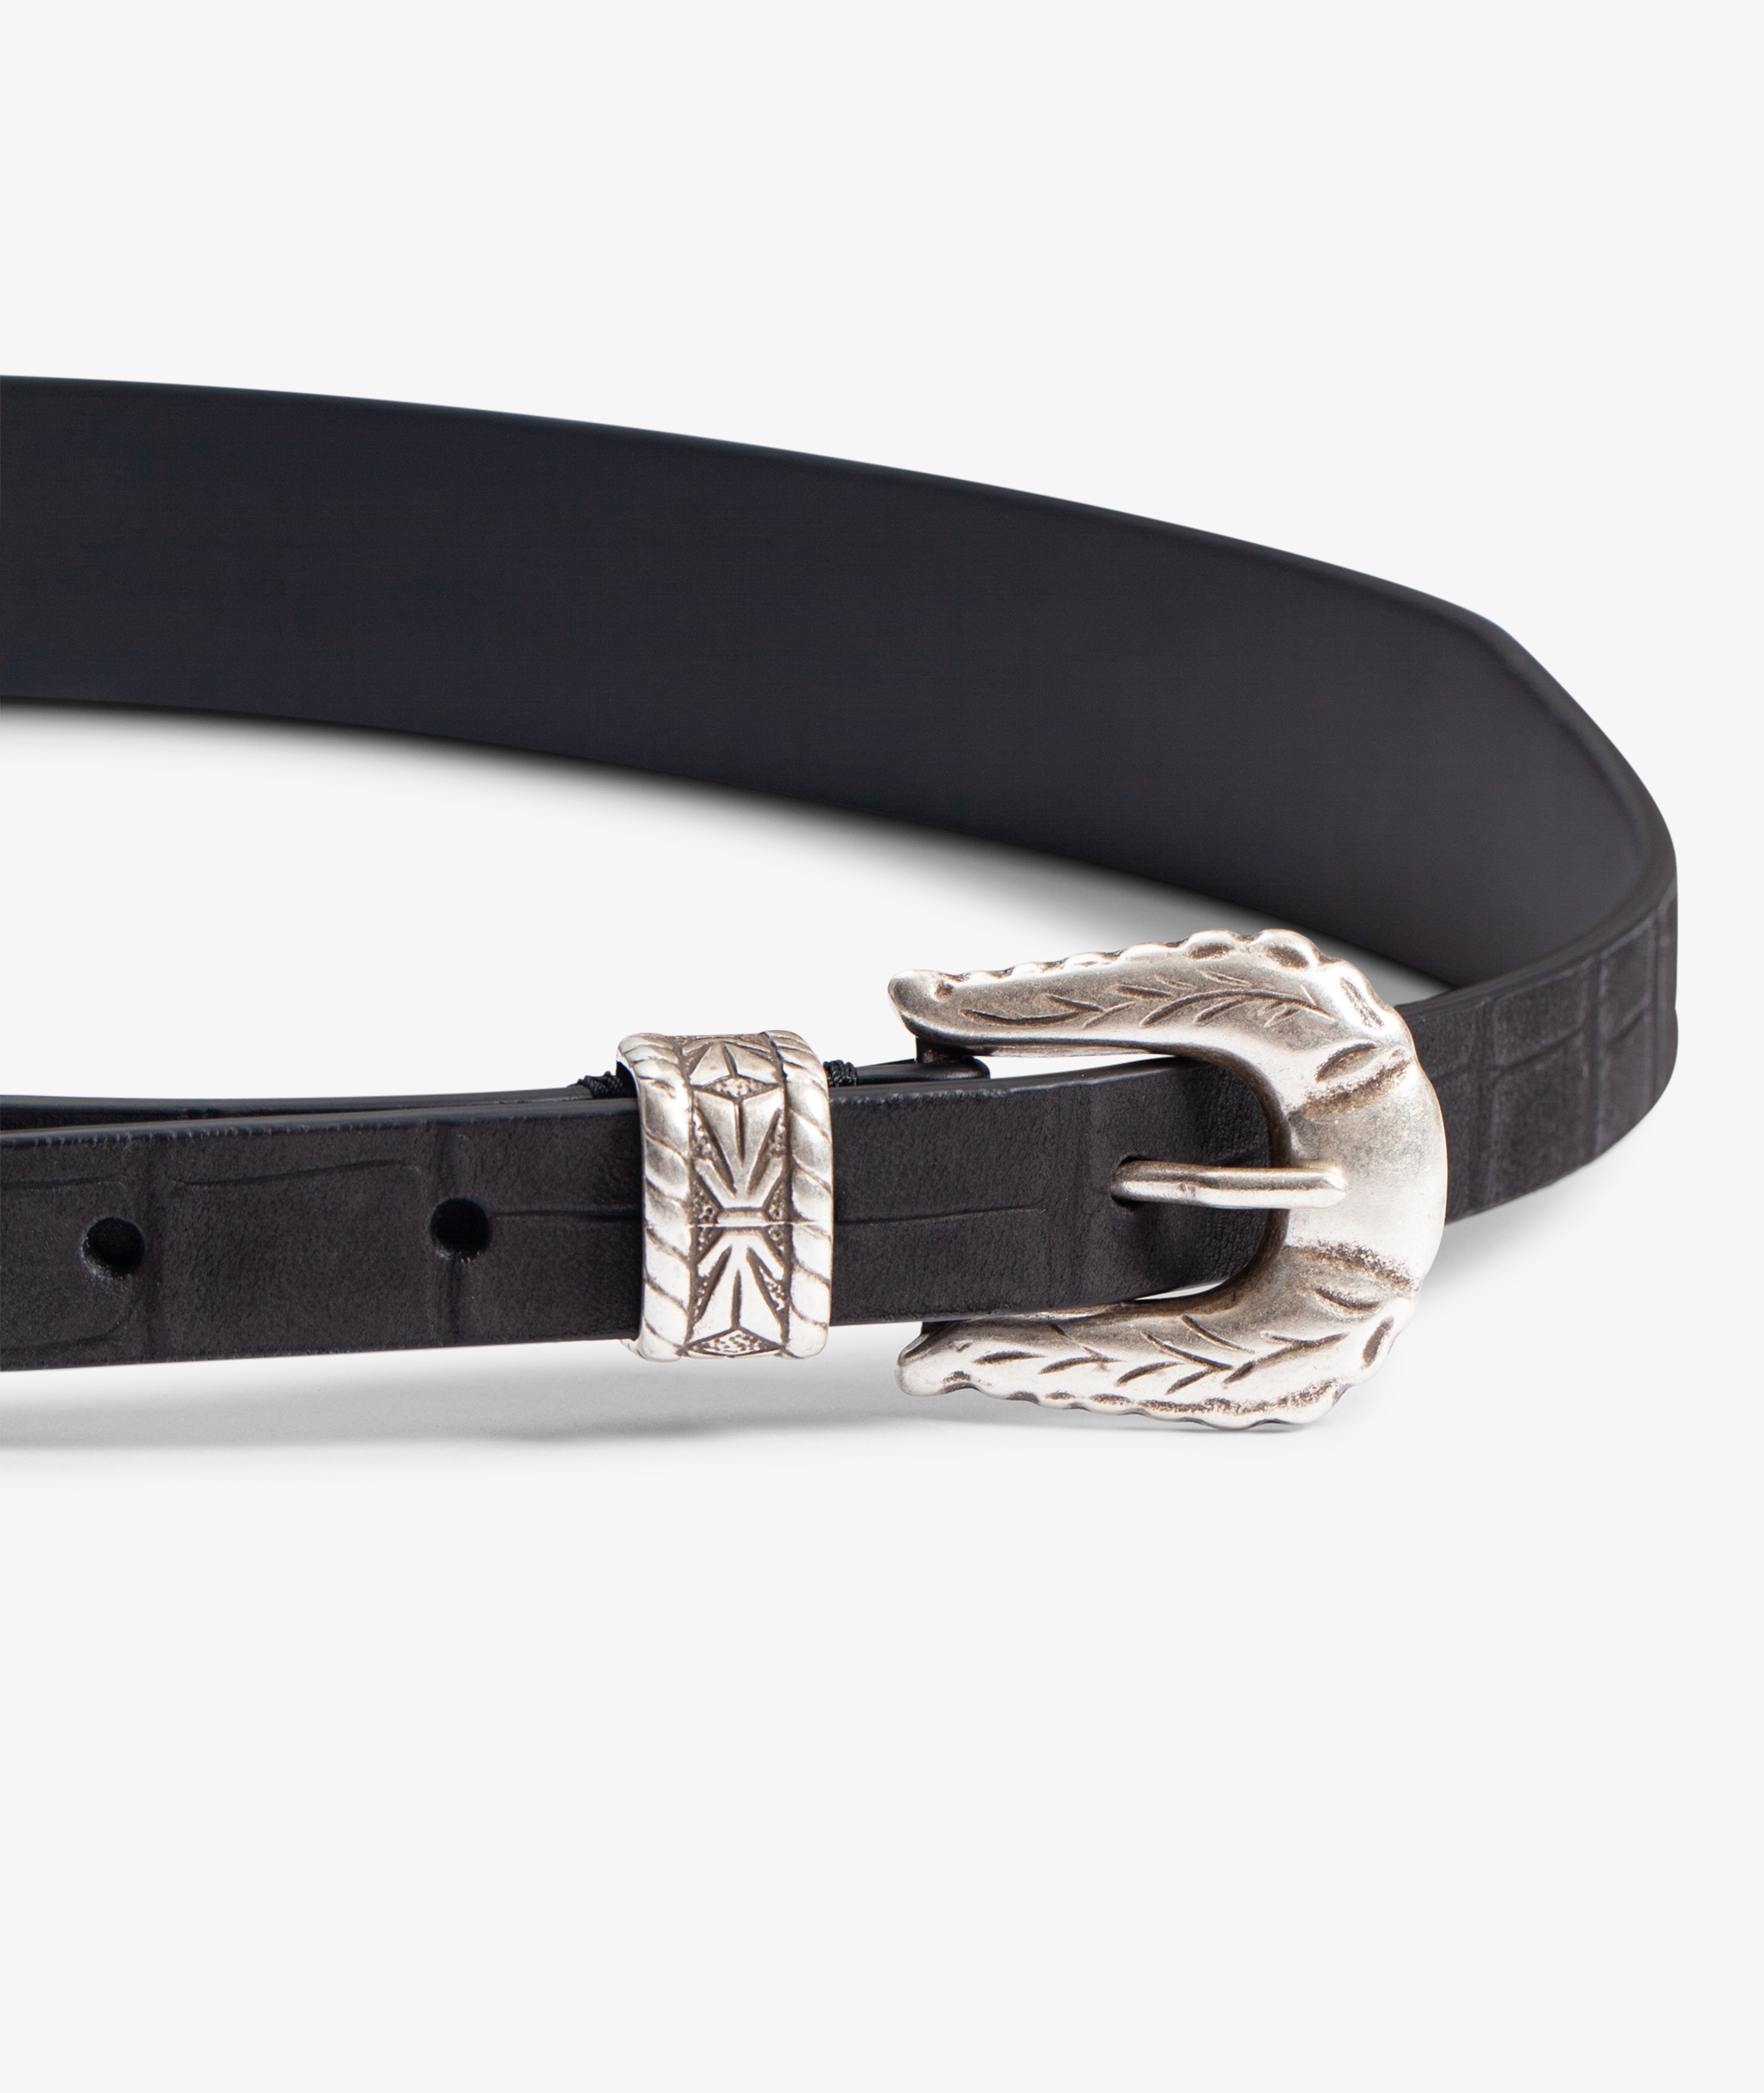 Norse Store  Shipping Worldwide - Anderson's Croc Leather Belt - Black